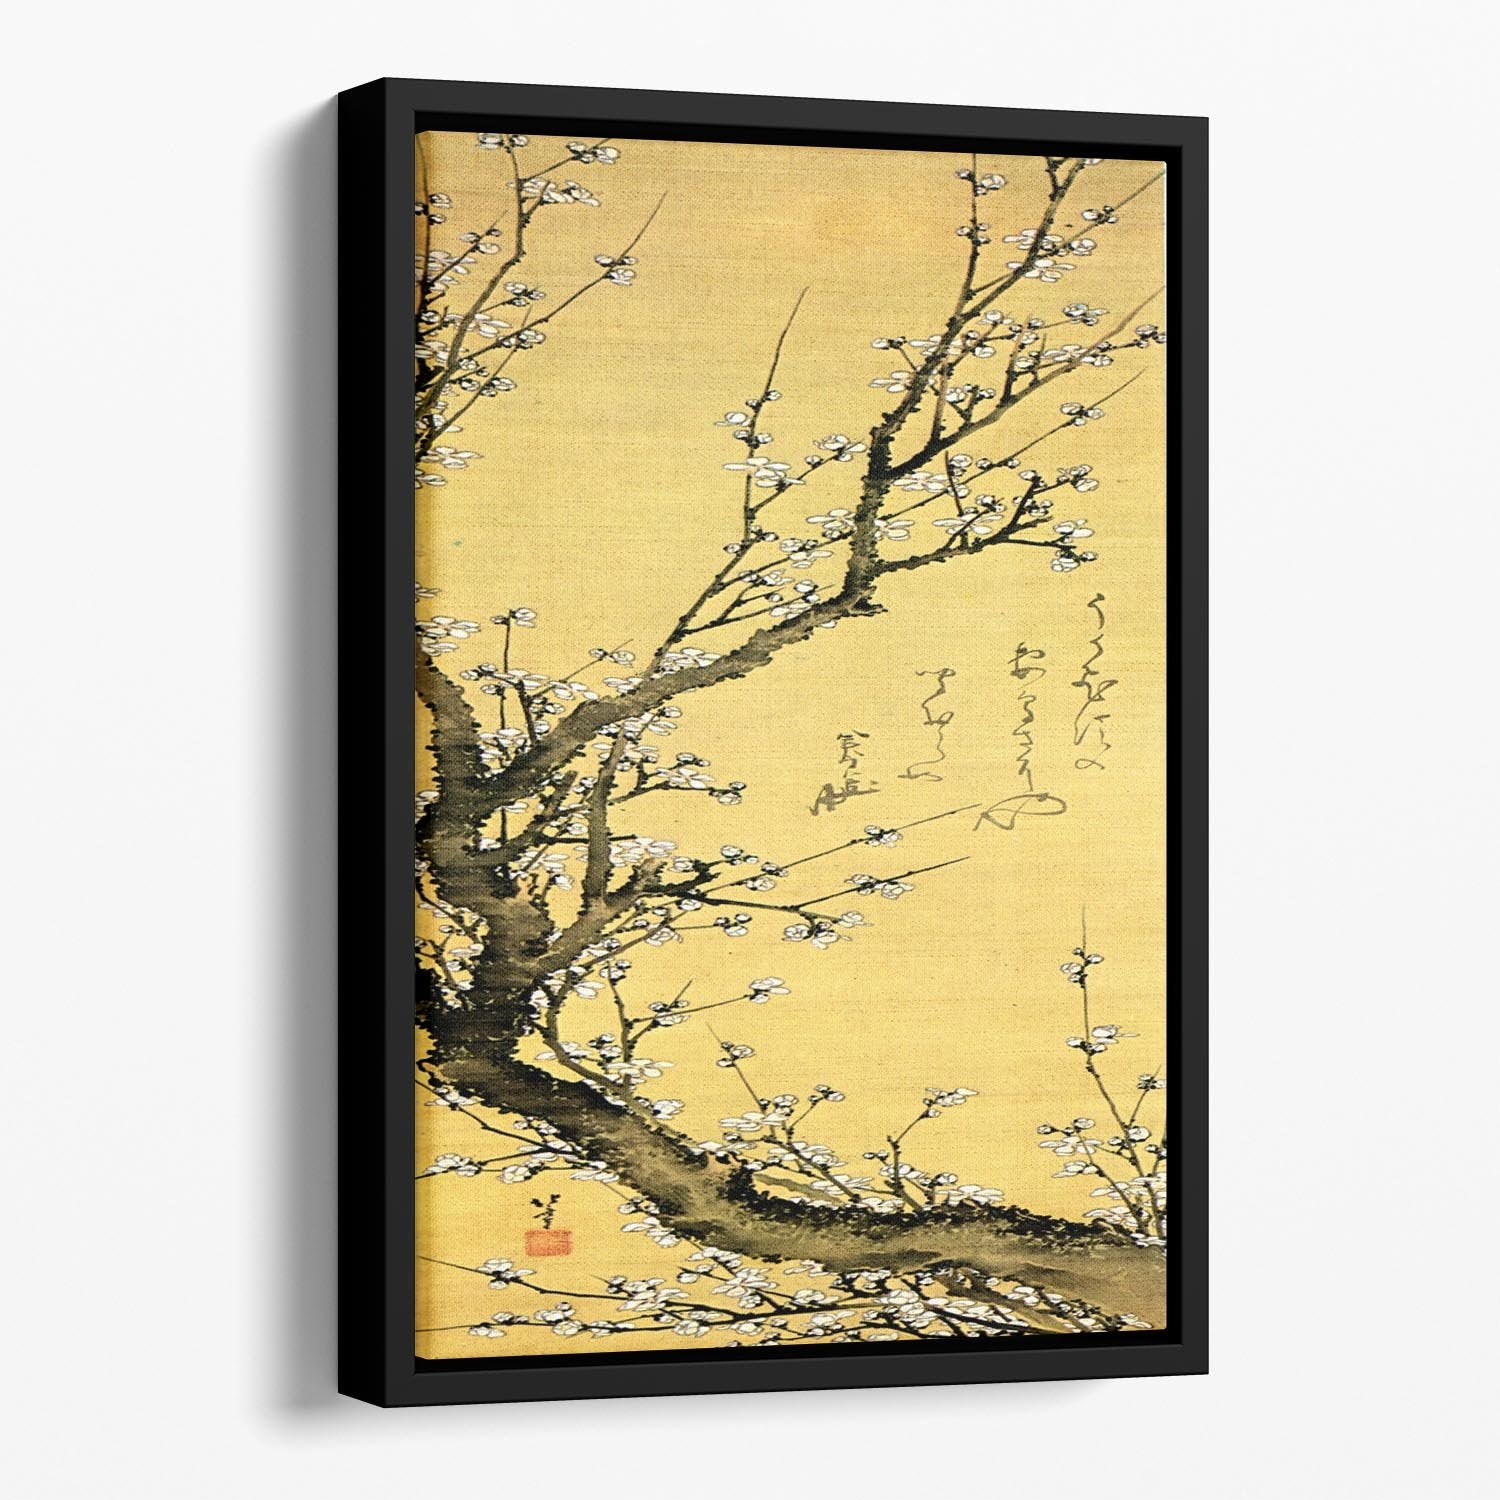 Flowering plum by Hokusai Floating Framed Canvas